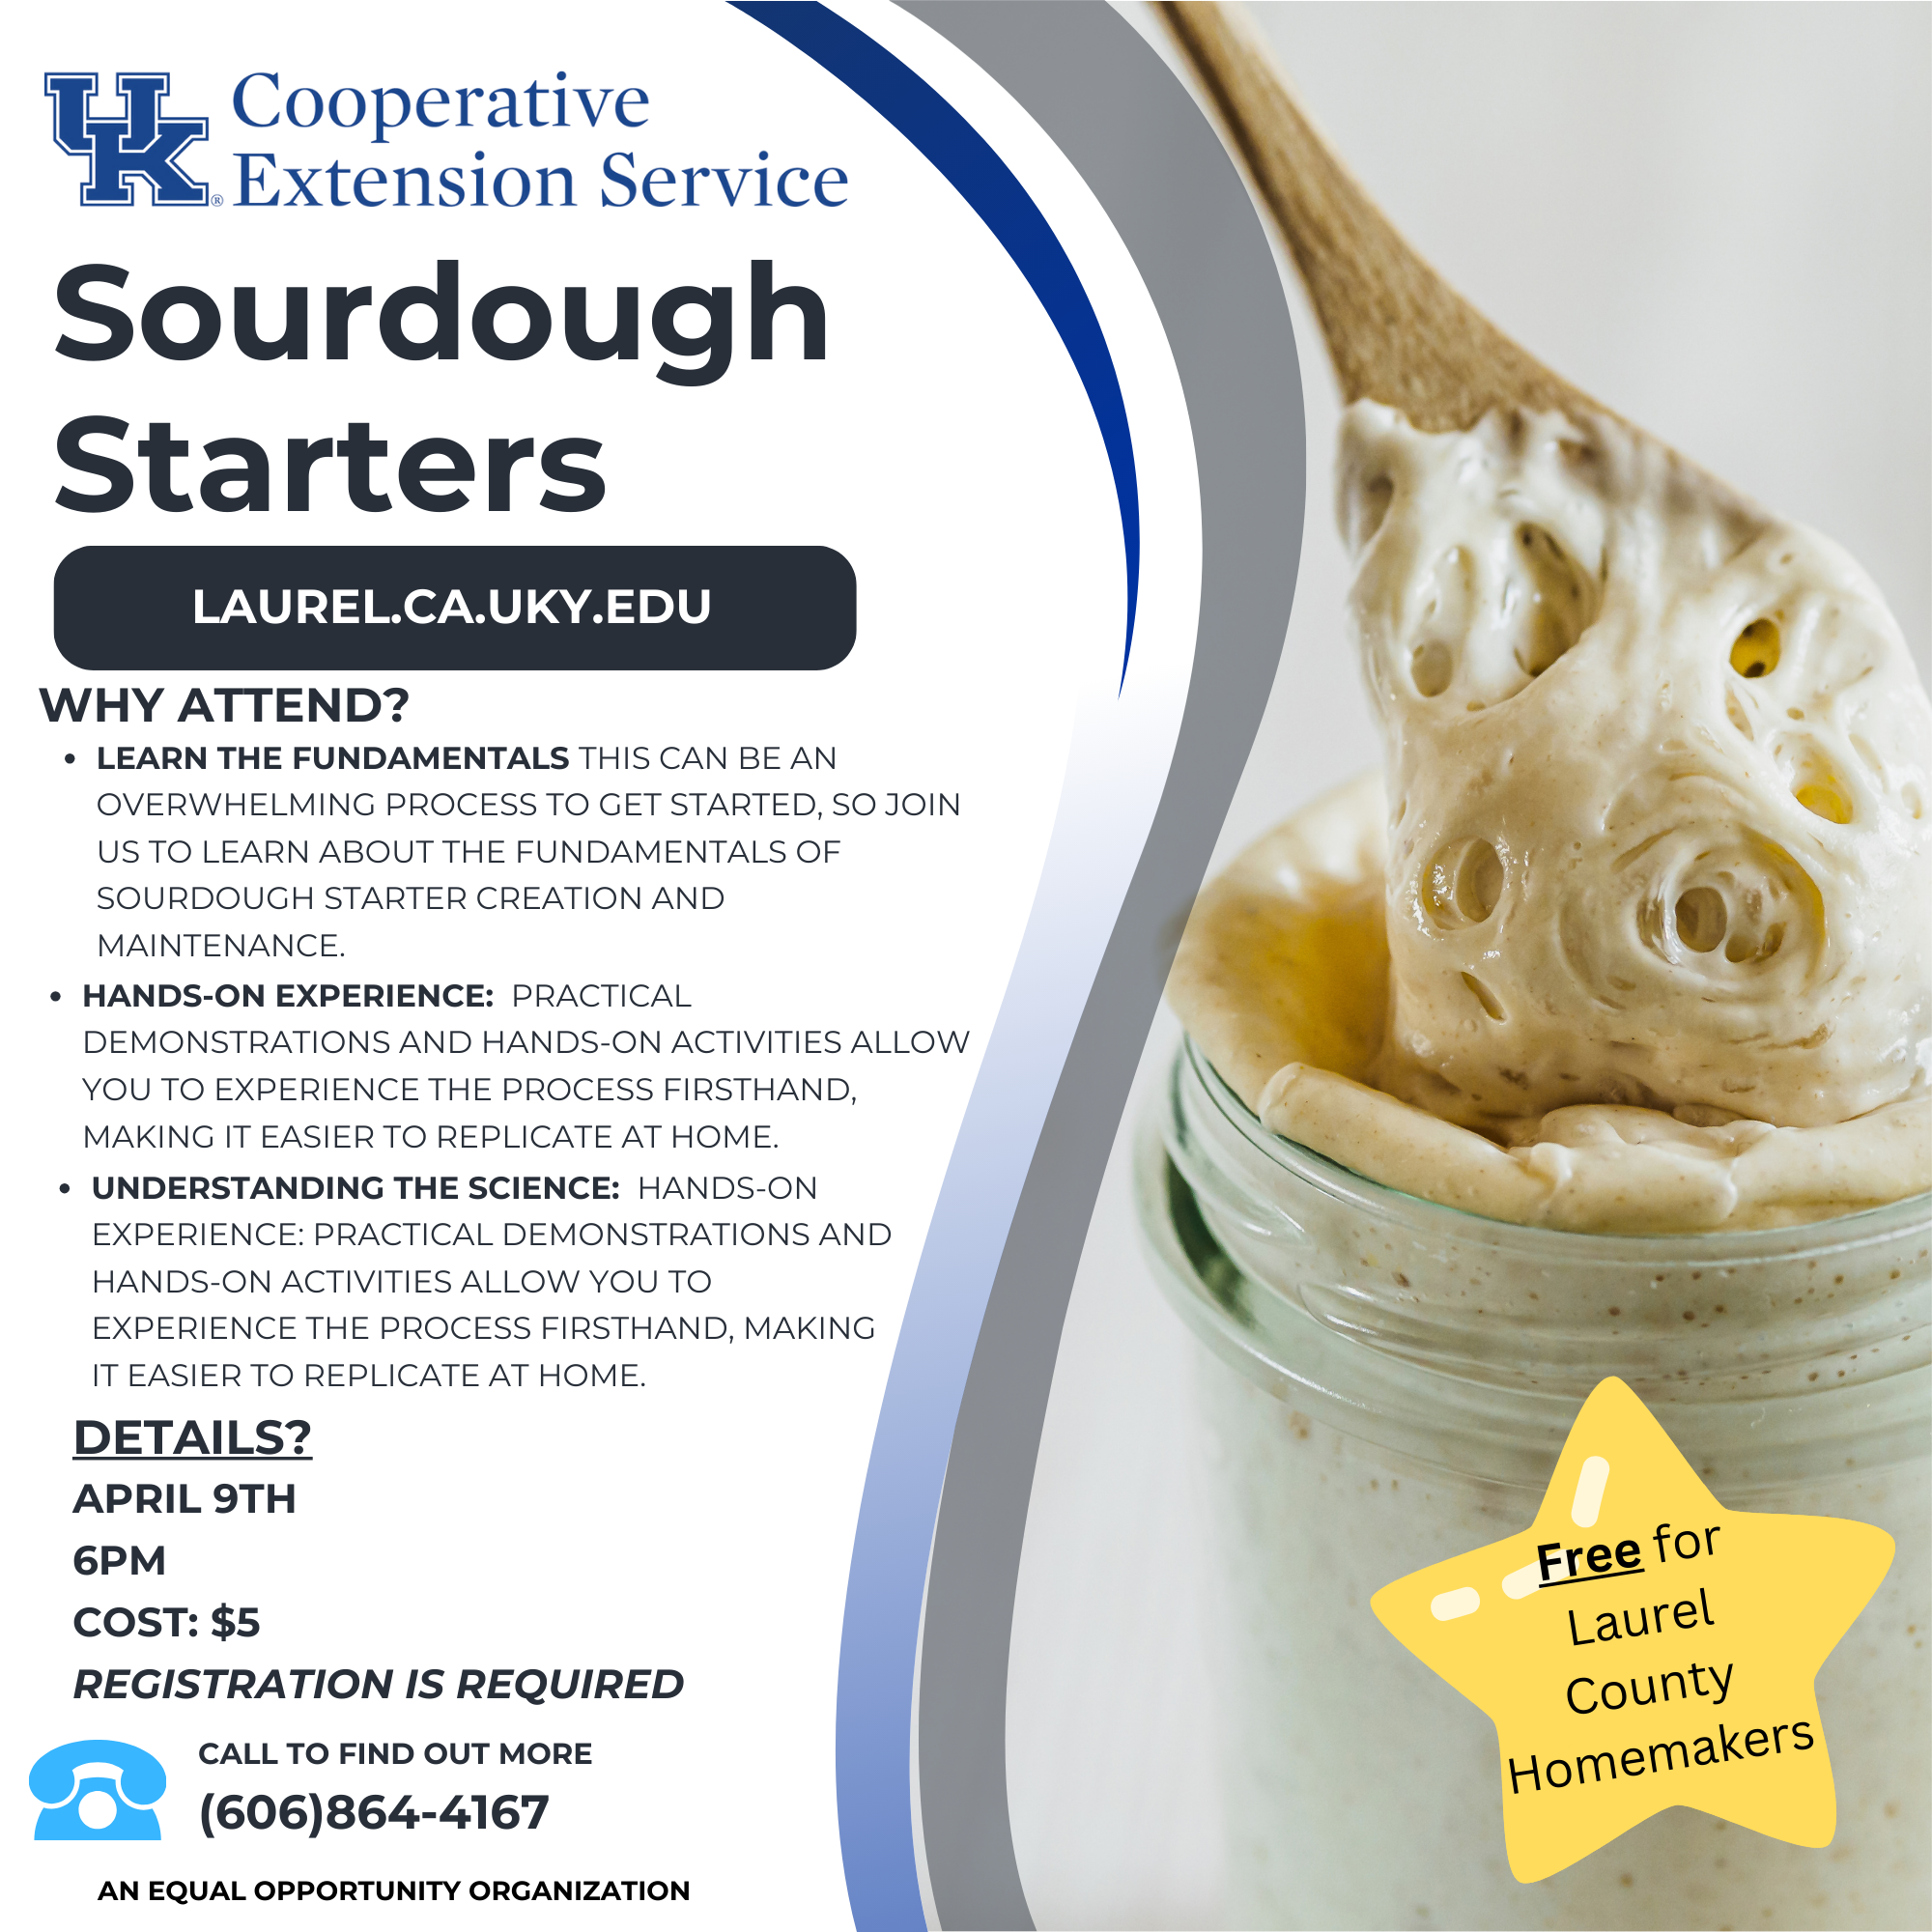 Flyer detailing class details such as date, time, and description. Background includes an active sourdough starter being stirred with a wooden spoon.